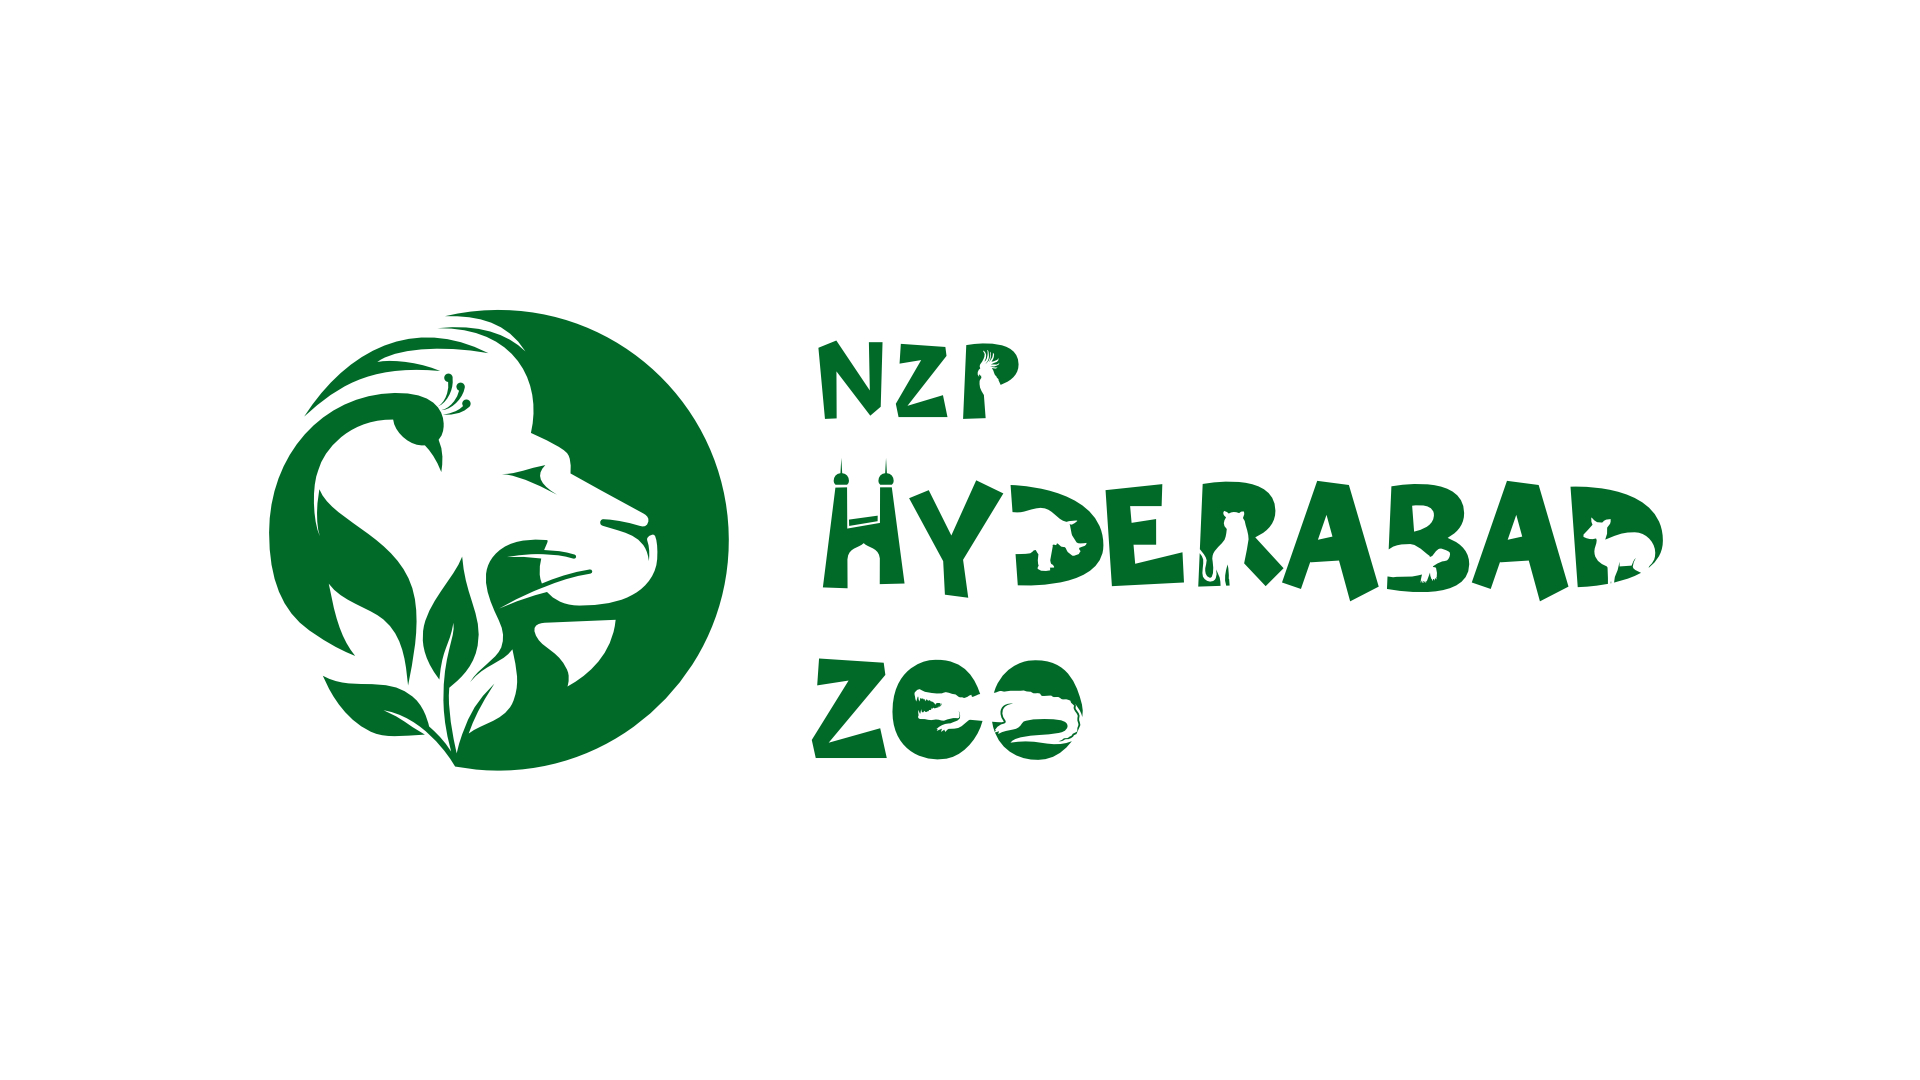 The magnificent Lion standing strong alongside the lovely peacock, surrounded by flora, is the epitome of natural beauty. Inspired by the harmony of nature, this logo is a representation of the wild in a single graphic-form.